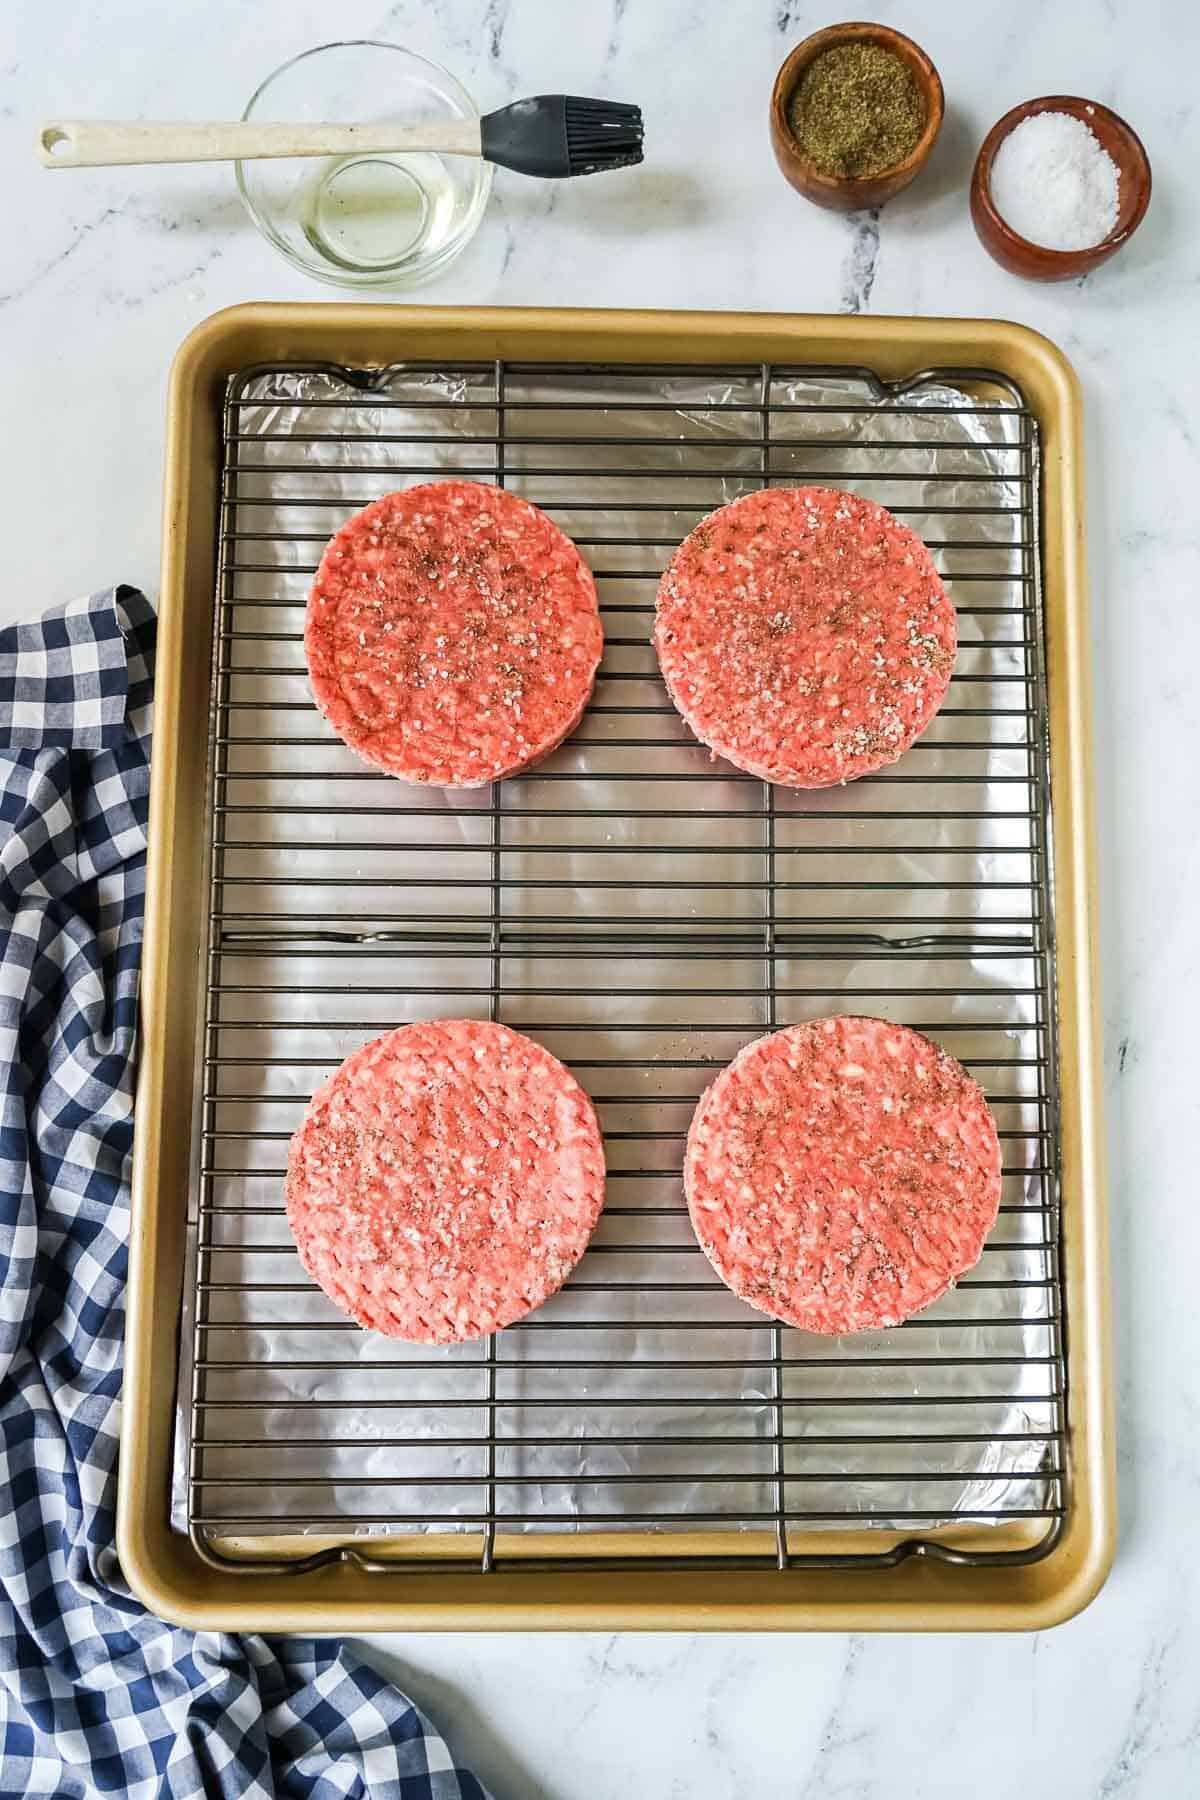 Frozen hamburgers on a baking sheet sprinkled with salt and pepper.